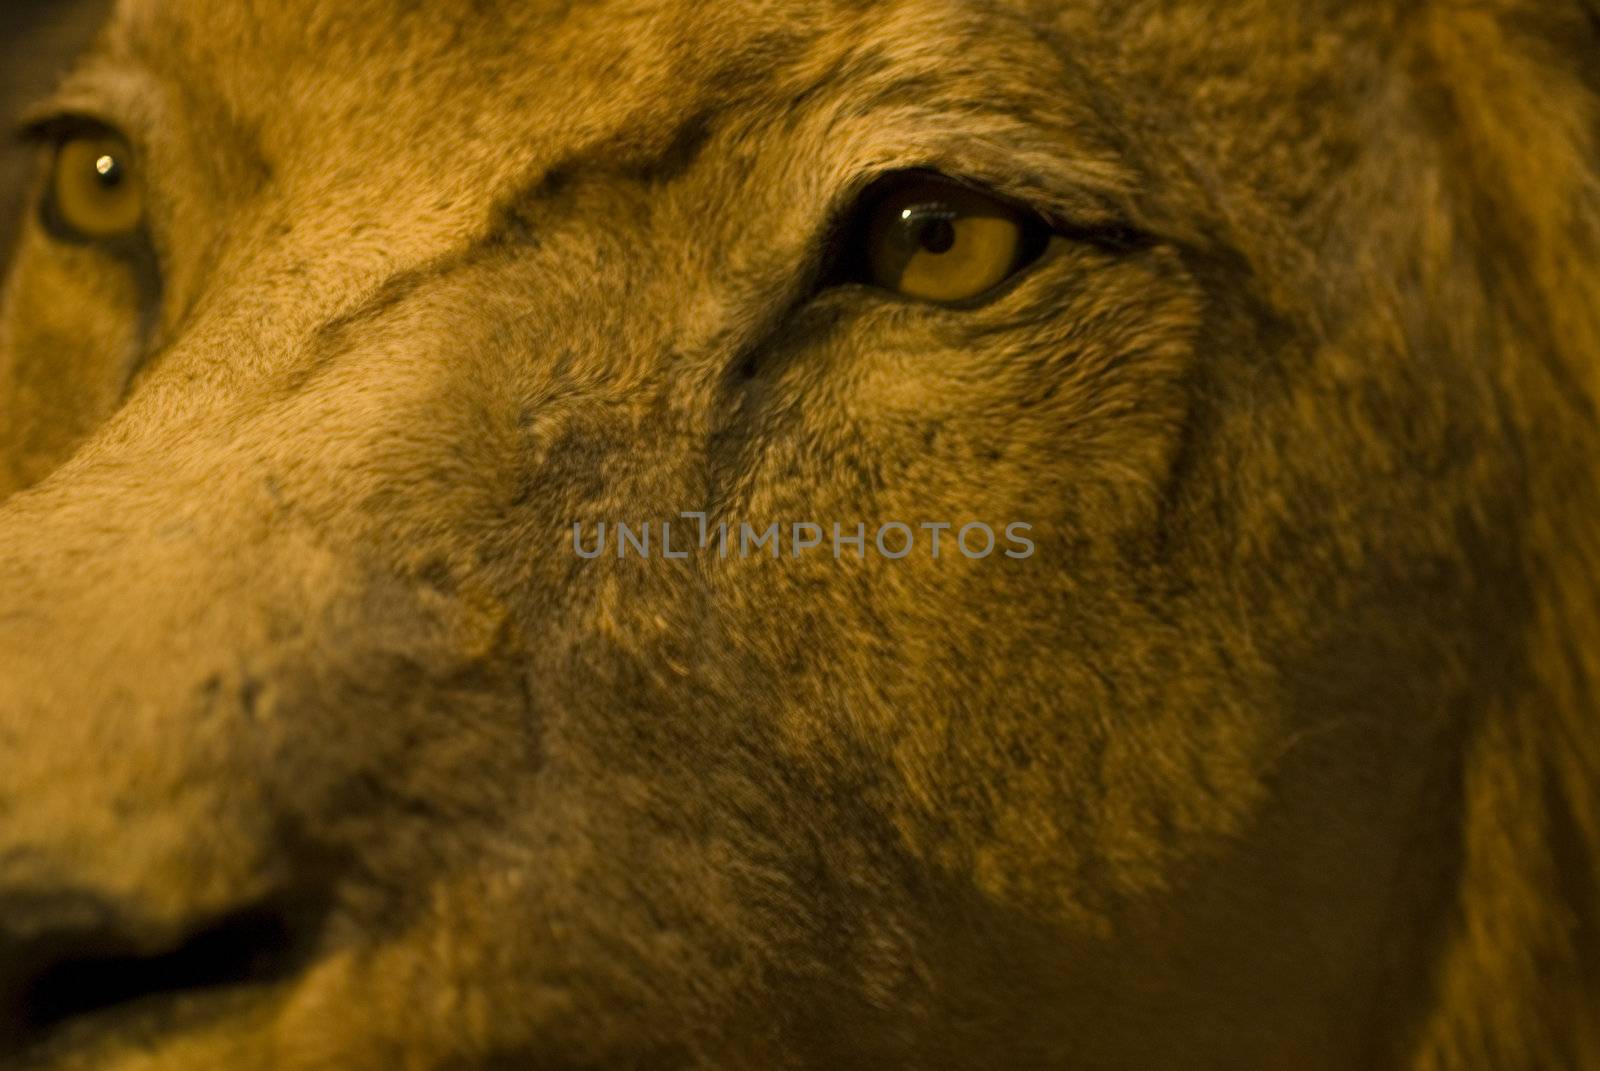 close up of the eyes of the lion